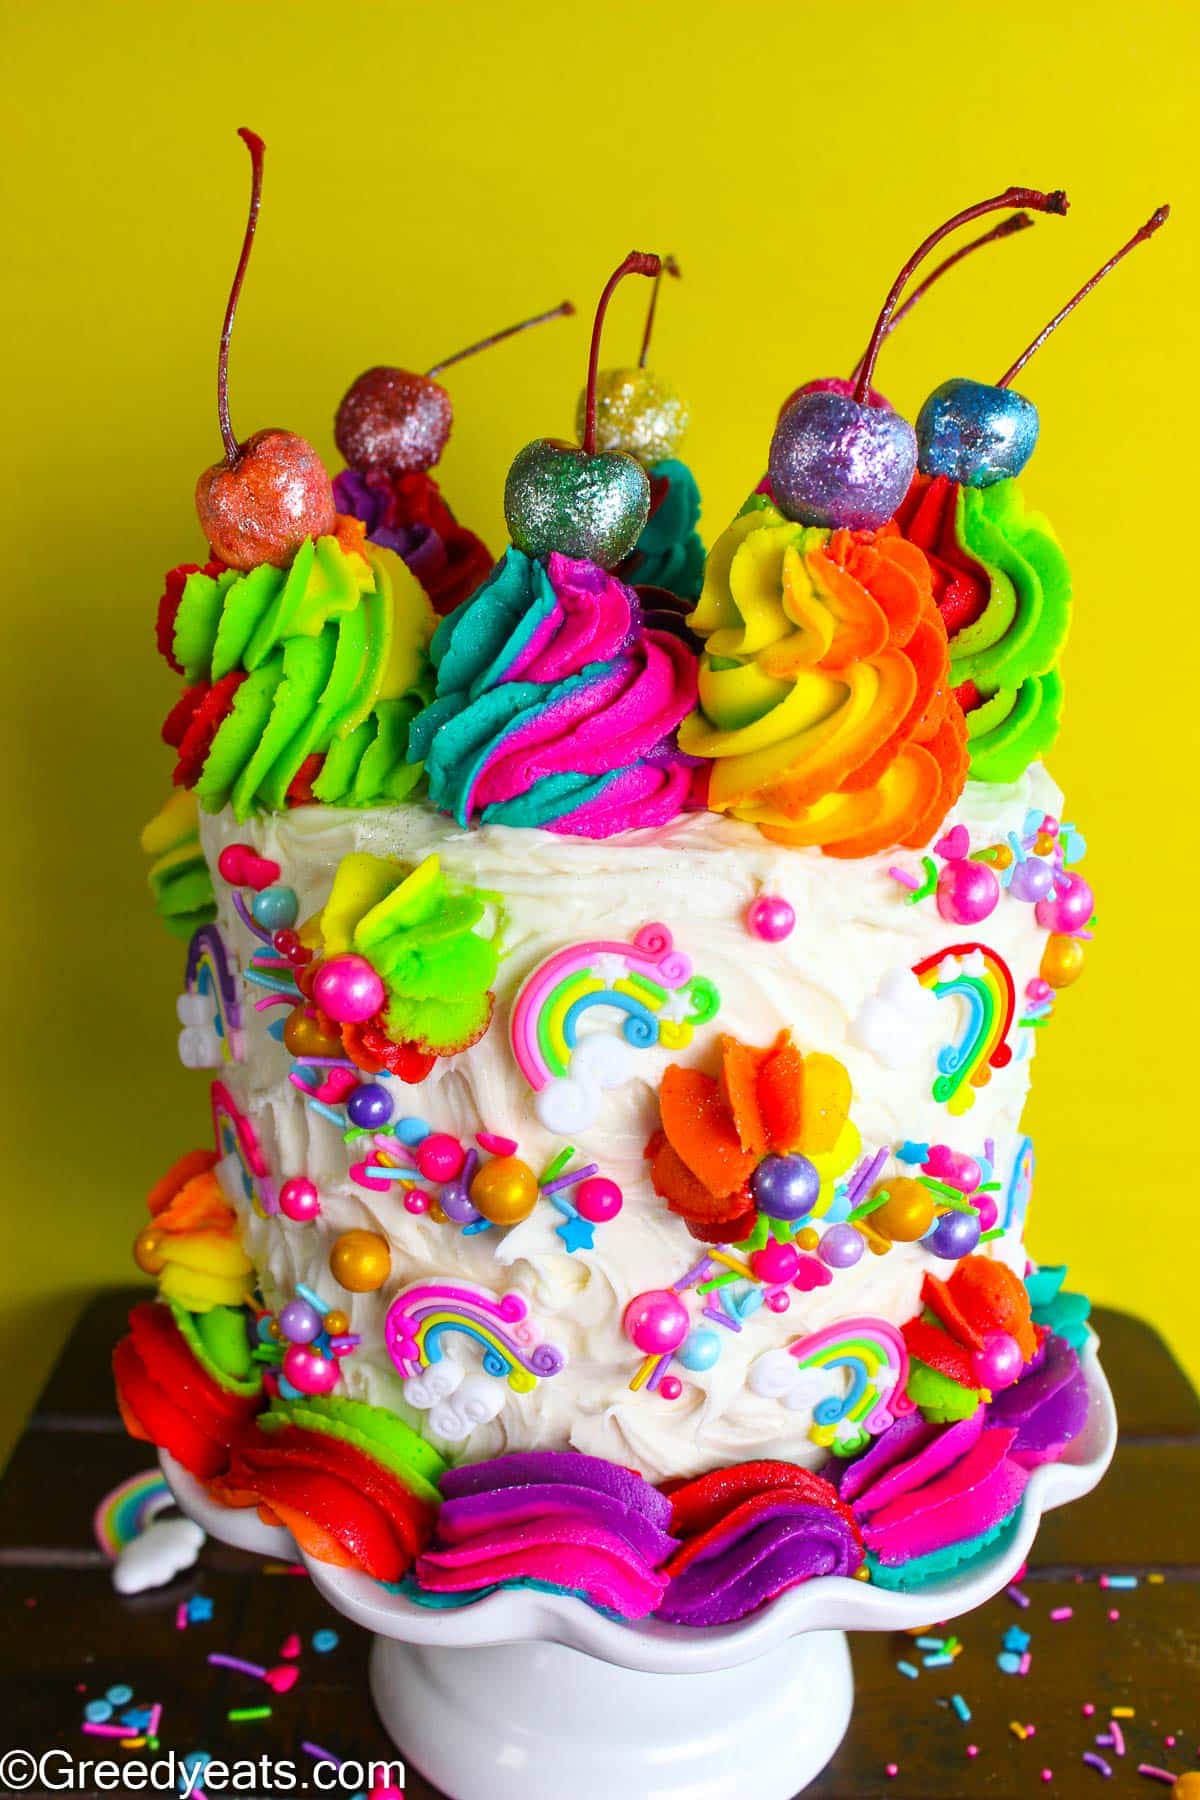 Soft and vibrant Rainbow Cake filled with rich chocolate filling and Vanilla Buttercream frosting.